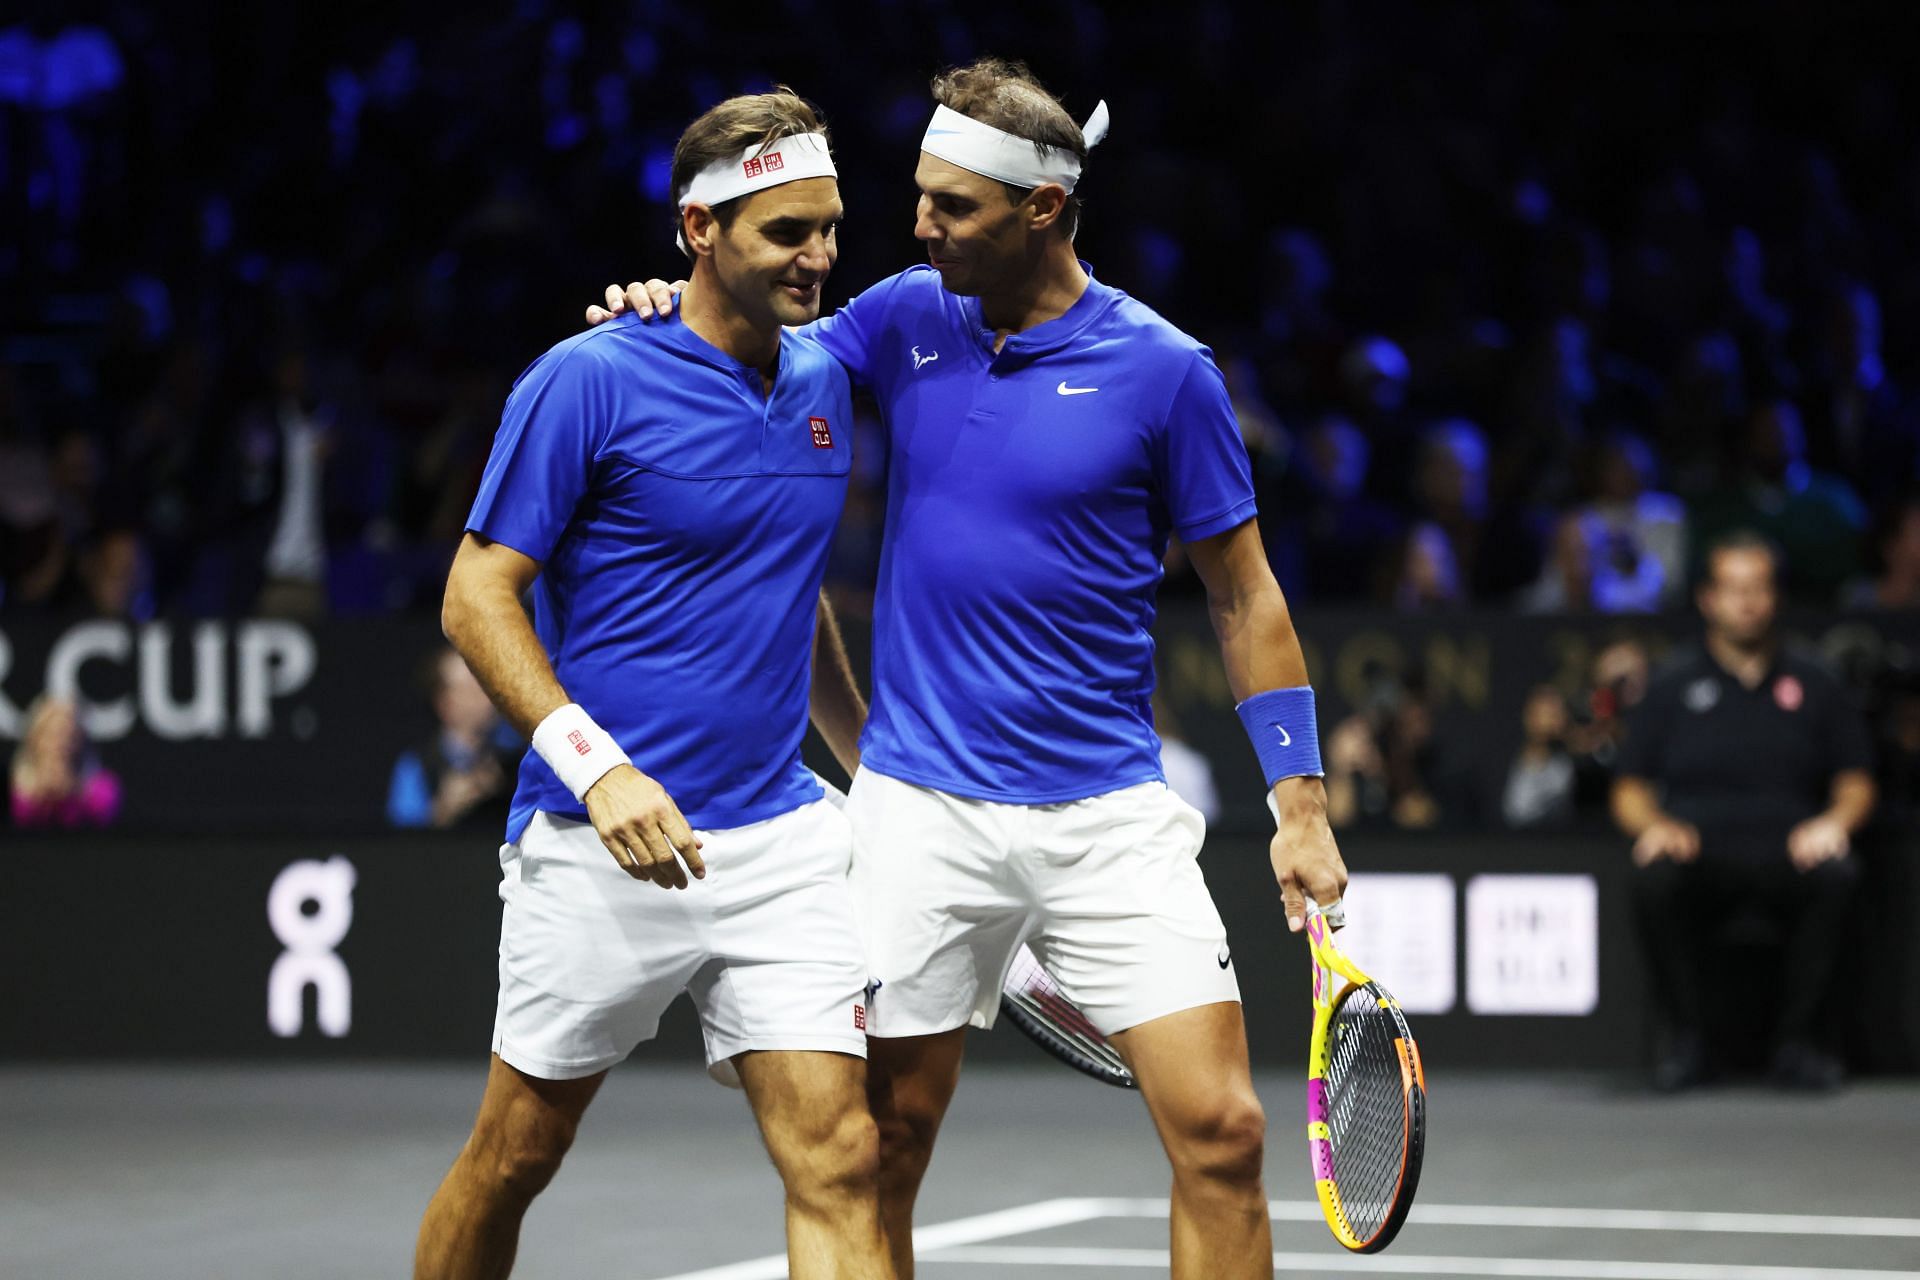 Roger Federer (L) and Rafael Nadal pictured at the 2022 Laver Cup